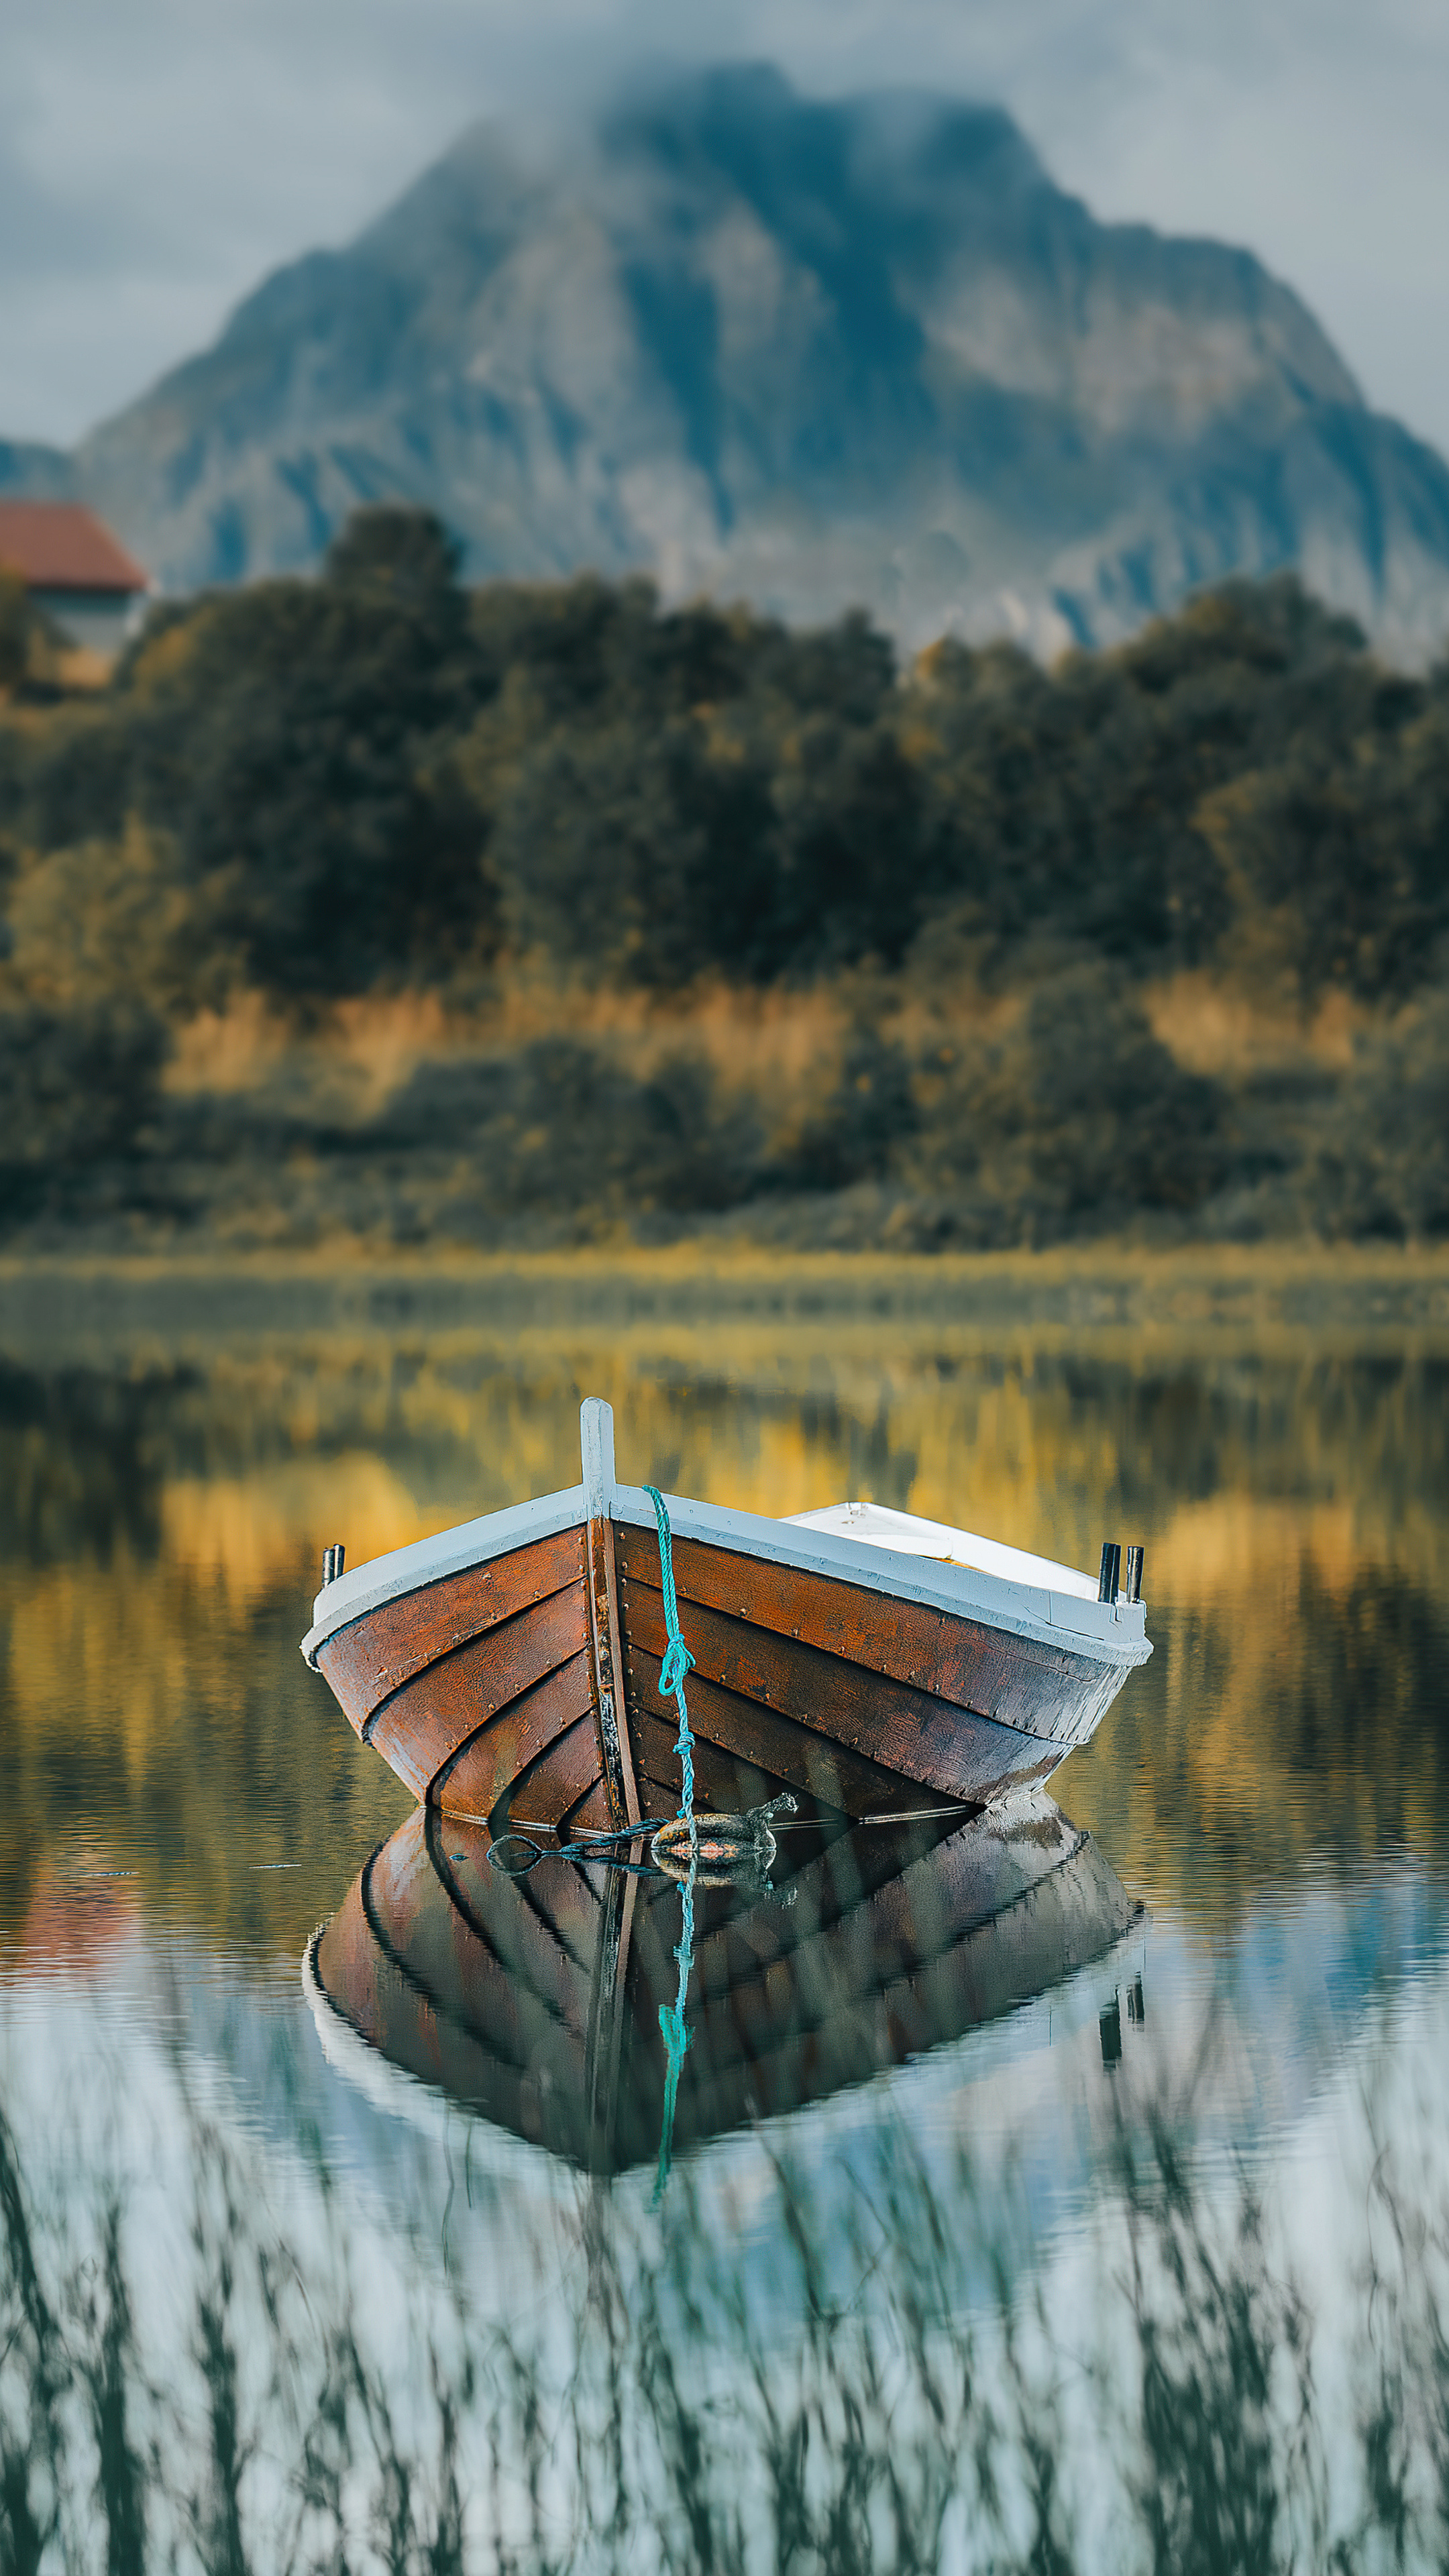 Boat: Propelled by oars, paddle, sails, or motor for travelling. 2160x3840 4K Background.